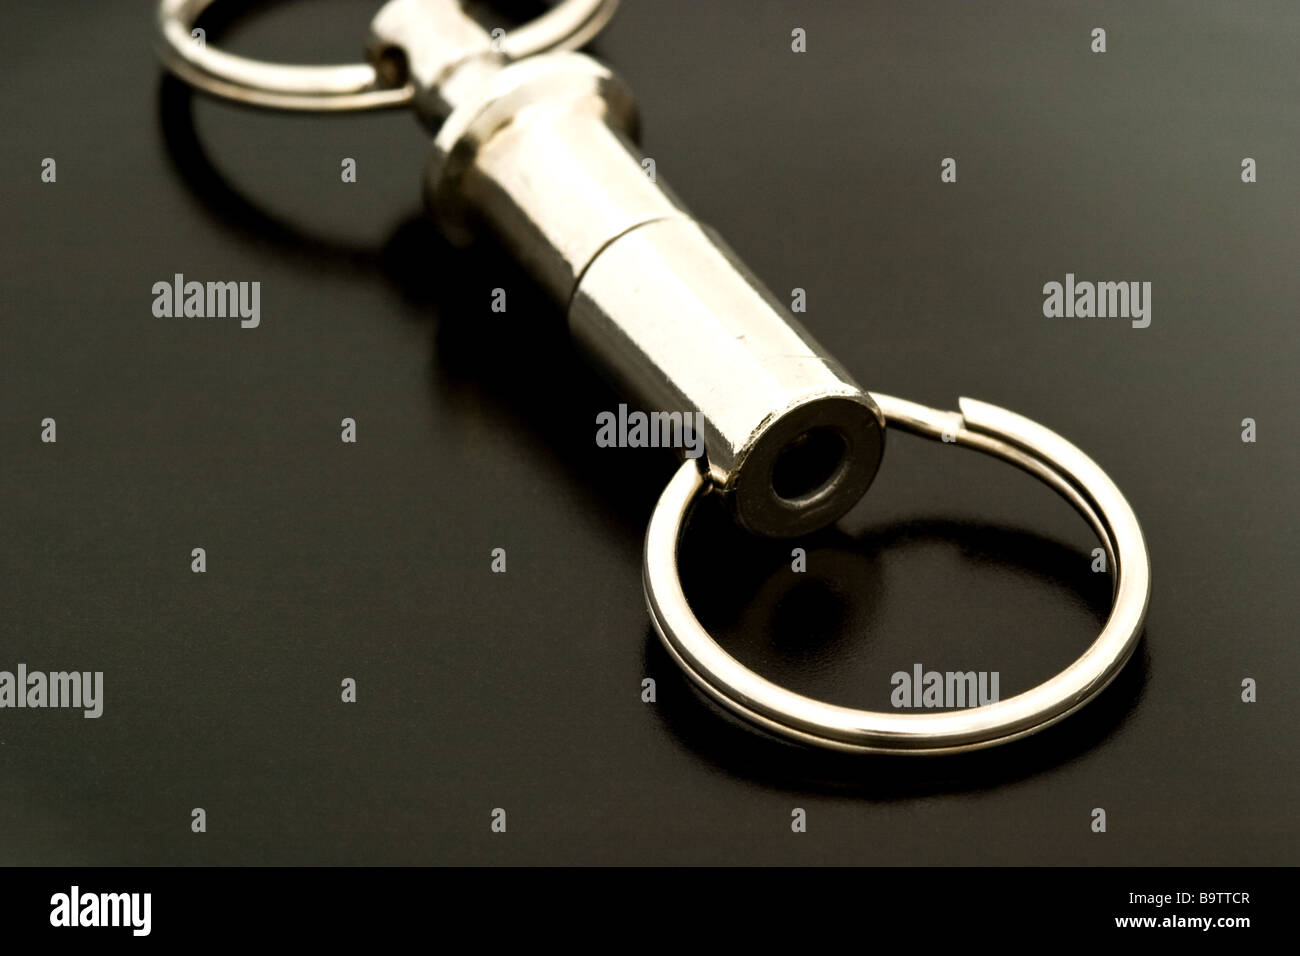 Silver key chain ring Stock Photo